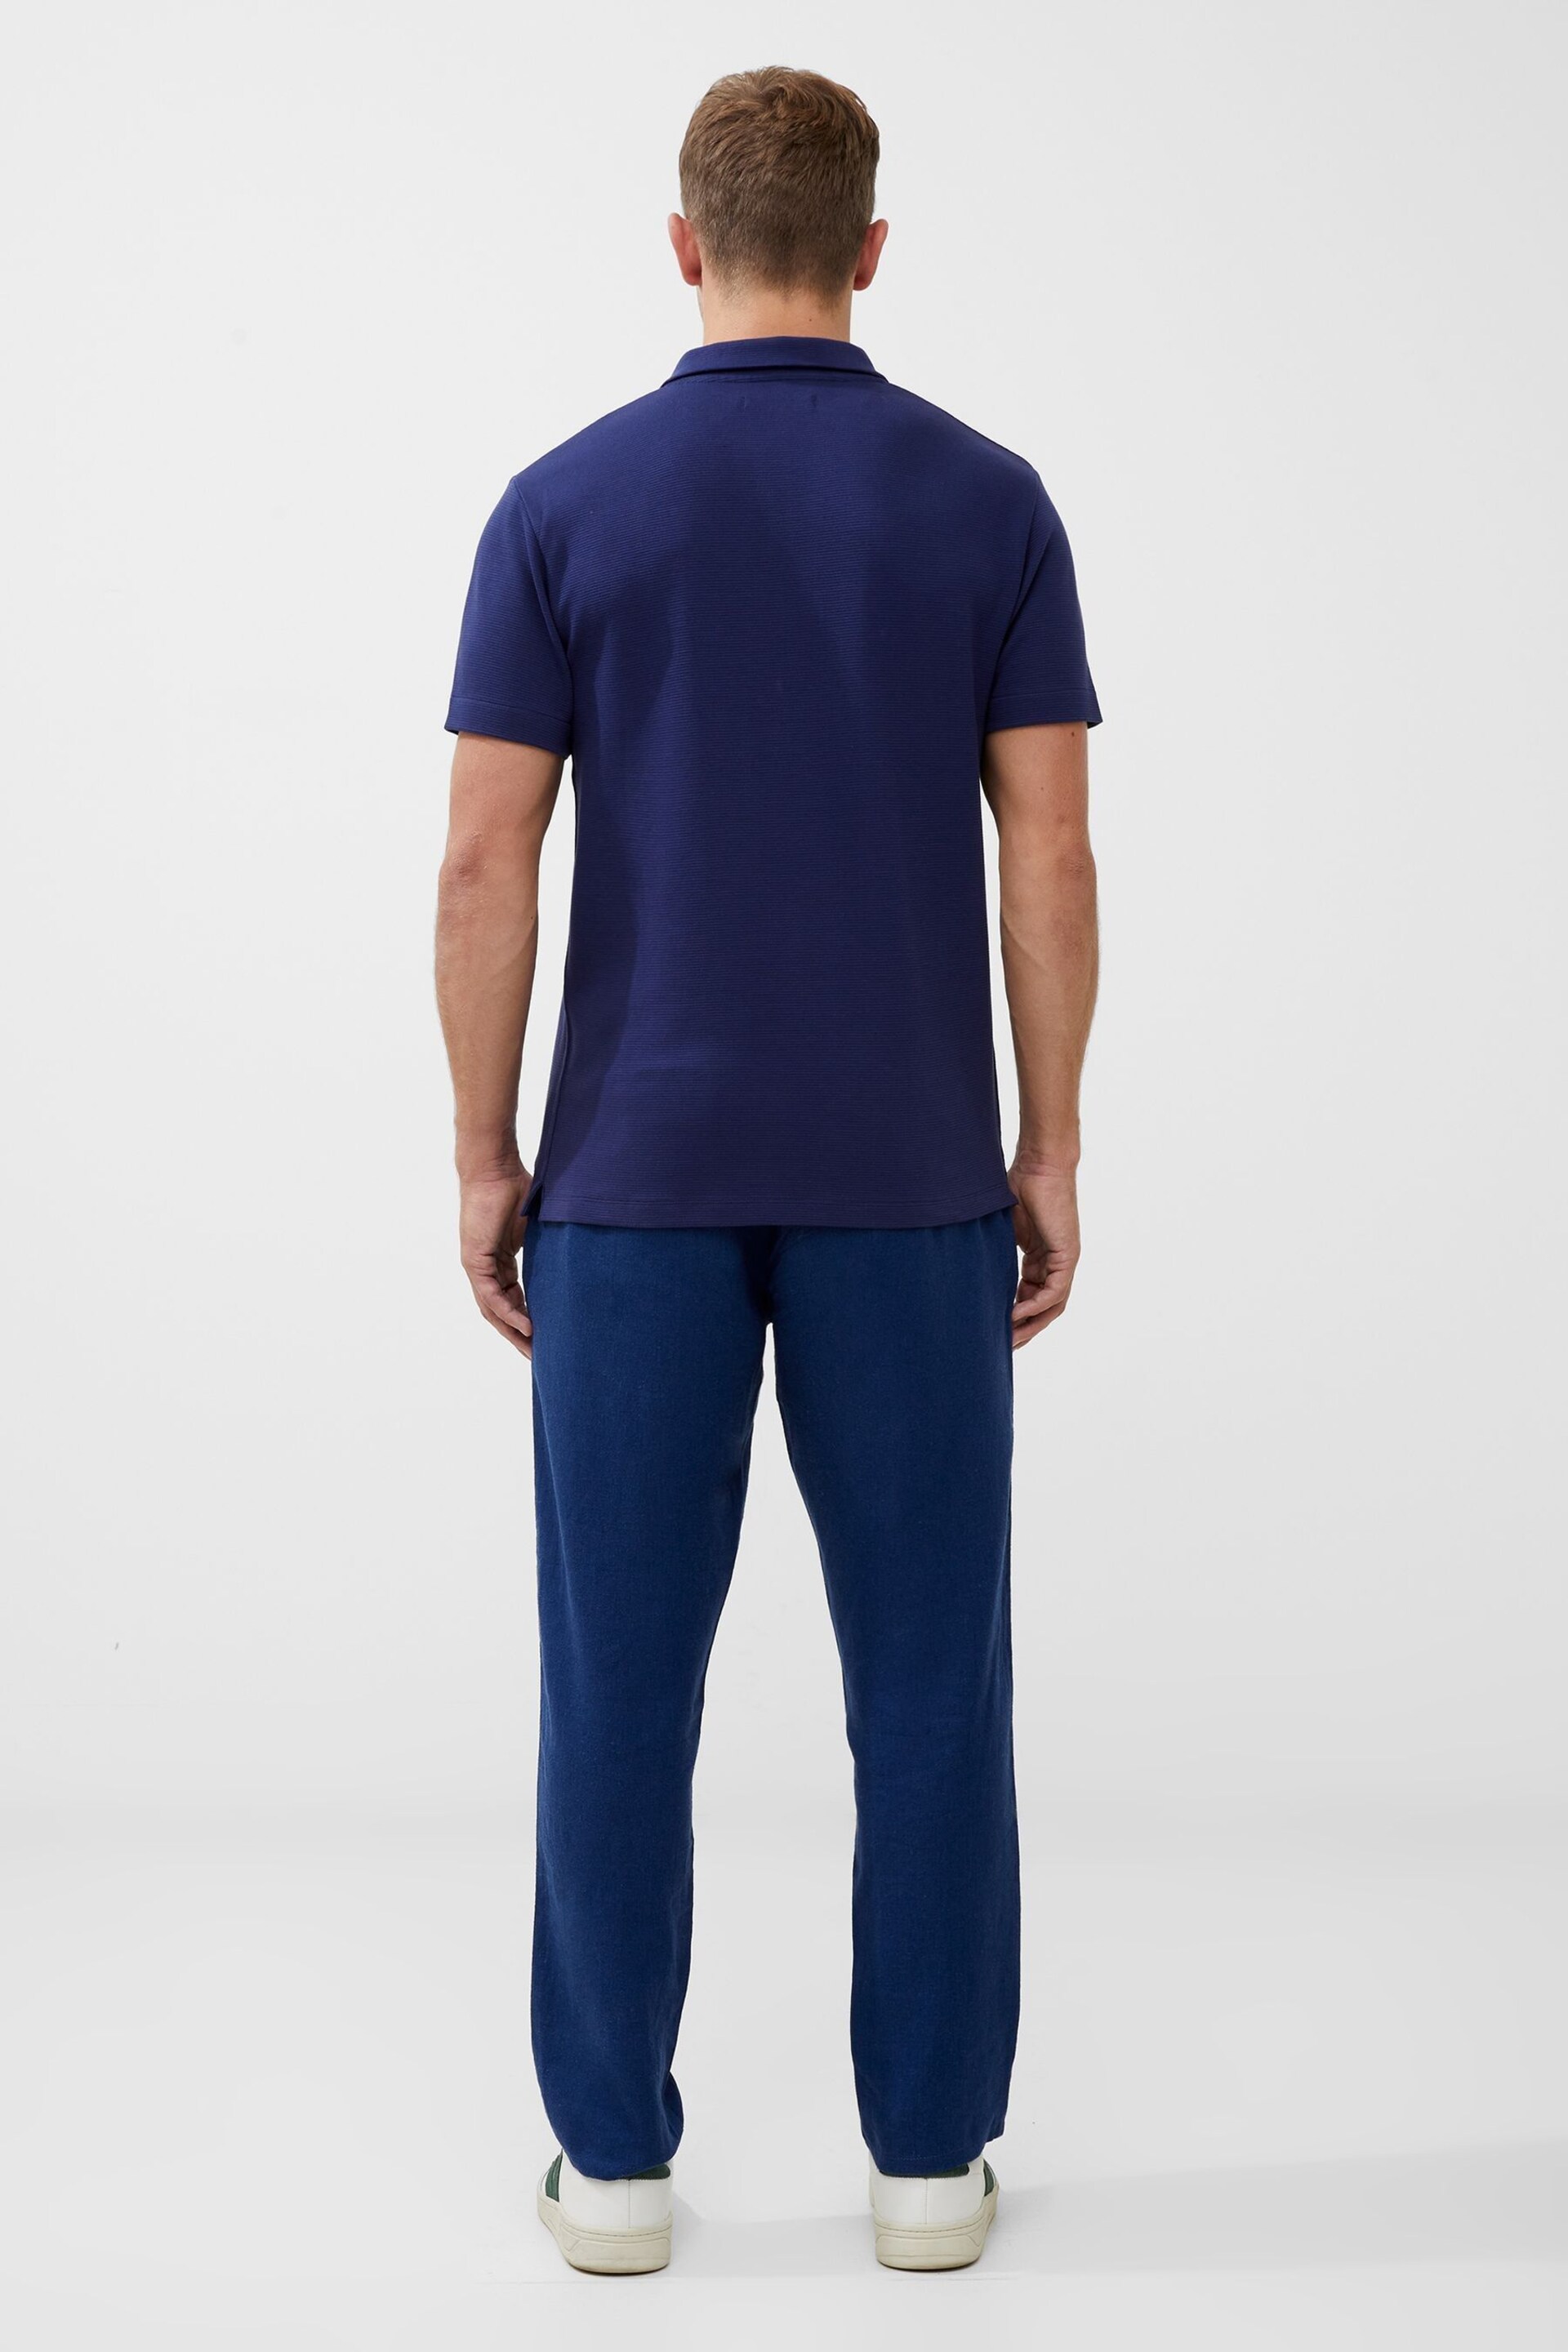 French Connection Blue Short Sleeve Ottoman Polo Shirt - Image 2 of 3